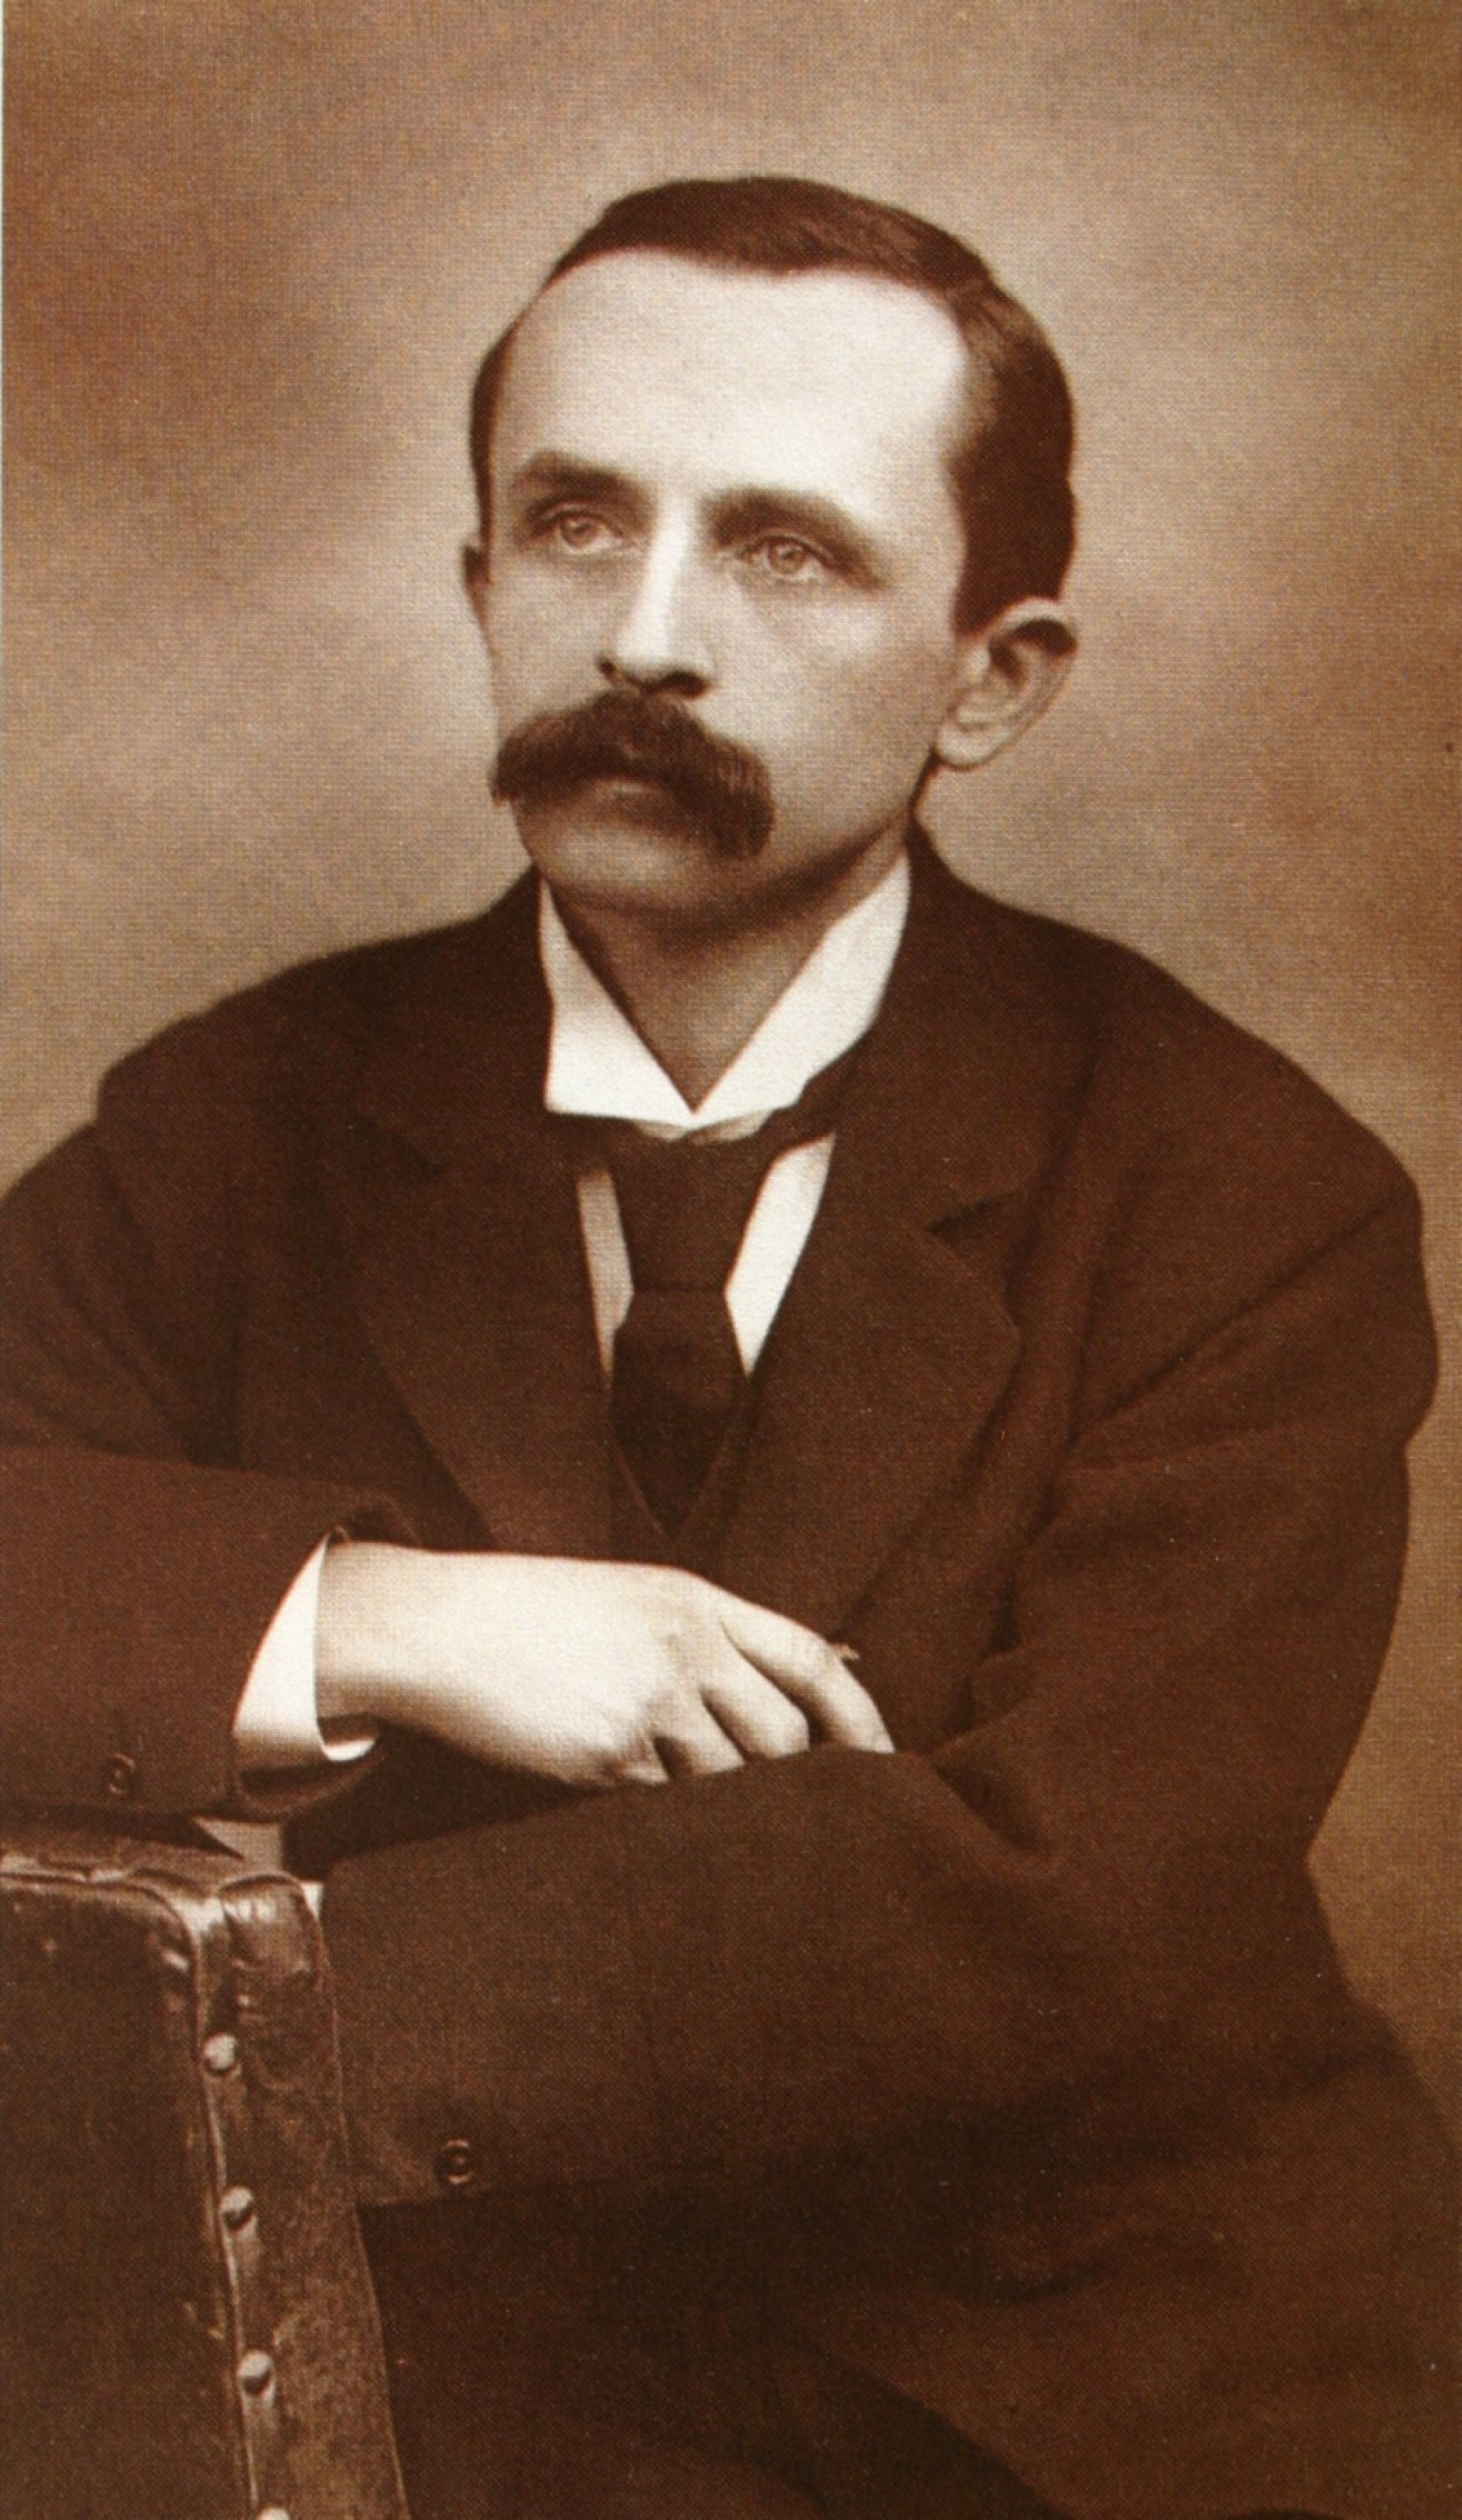 J. M. Barrie 1860-1937 author Peter Pan